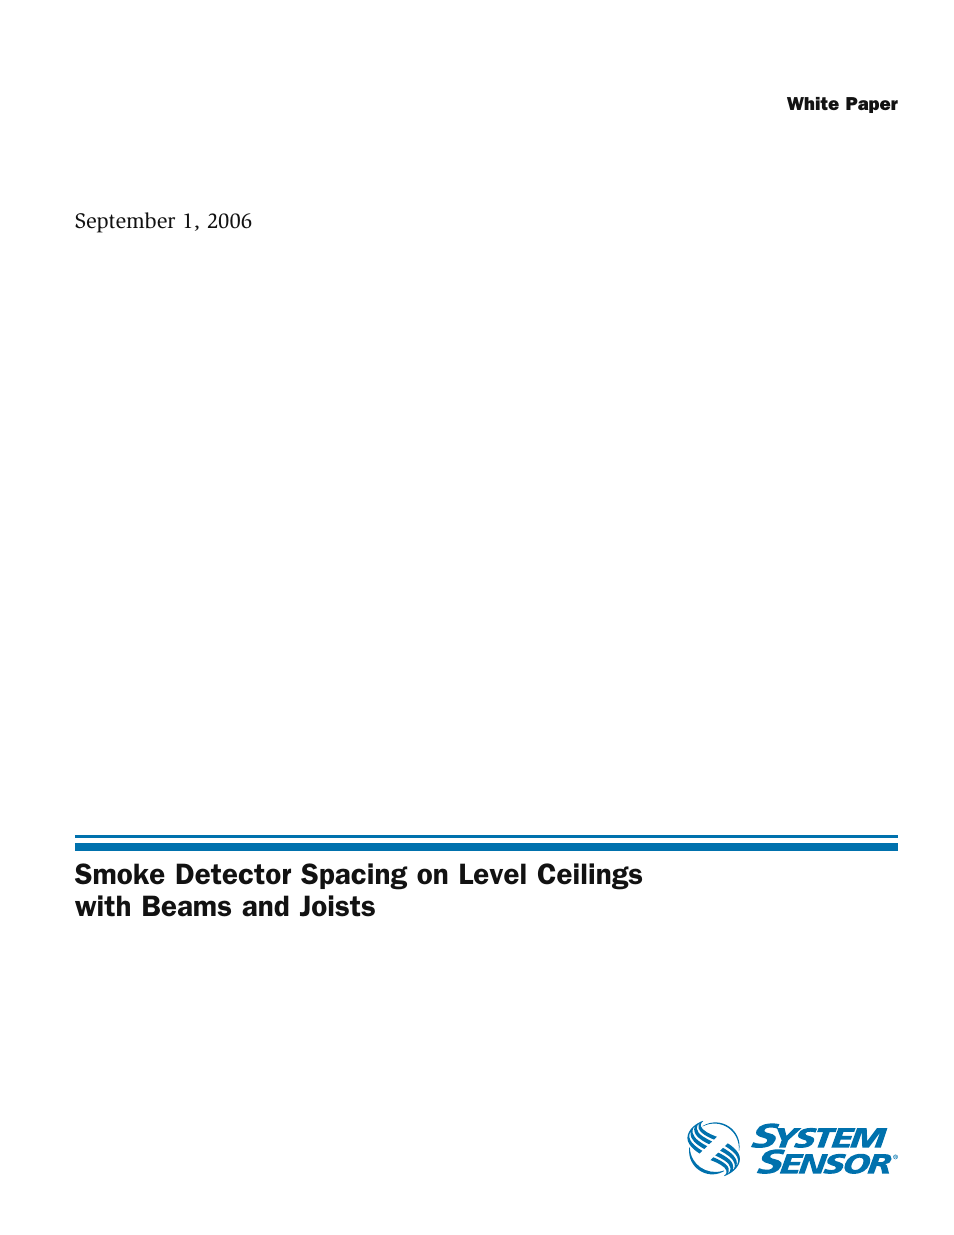 Smoke Detector Spacing on Level Ceilings with Beams and Joists